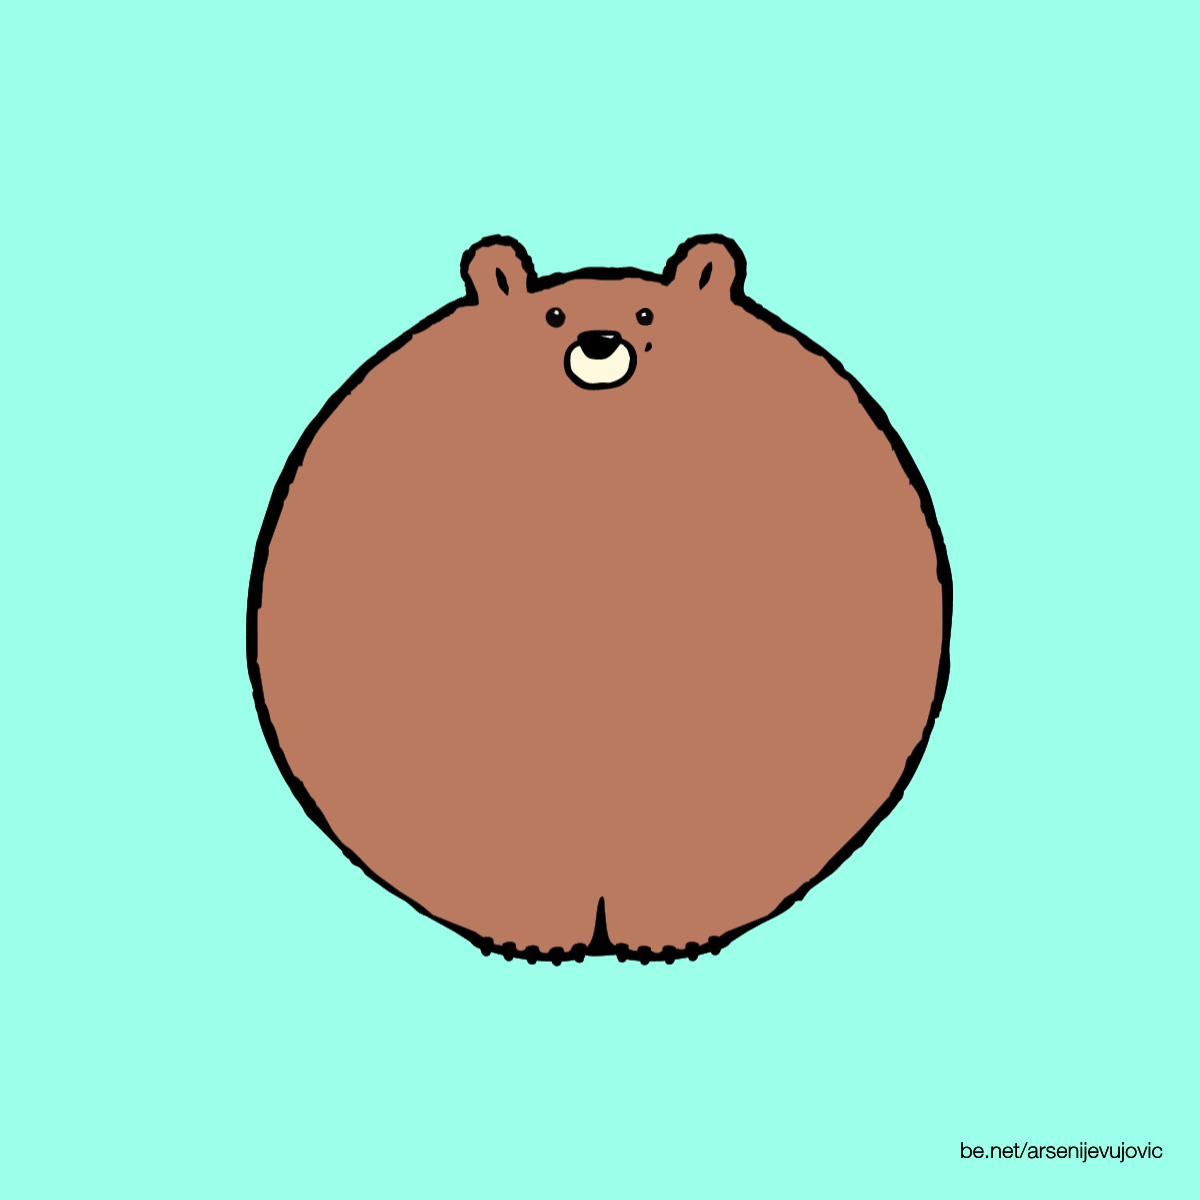 dribbblers,motiongraphics,characterdesign,animation,animals,illustration,graphics,animal,motion,bear,graphic,wild,zoo,dribbble,grizzly